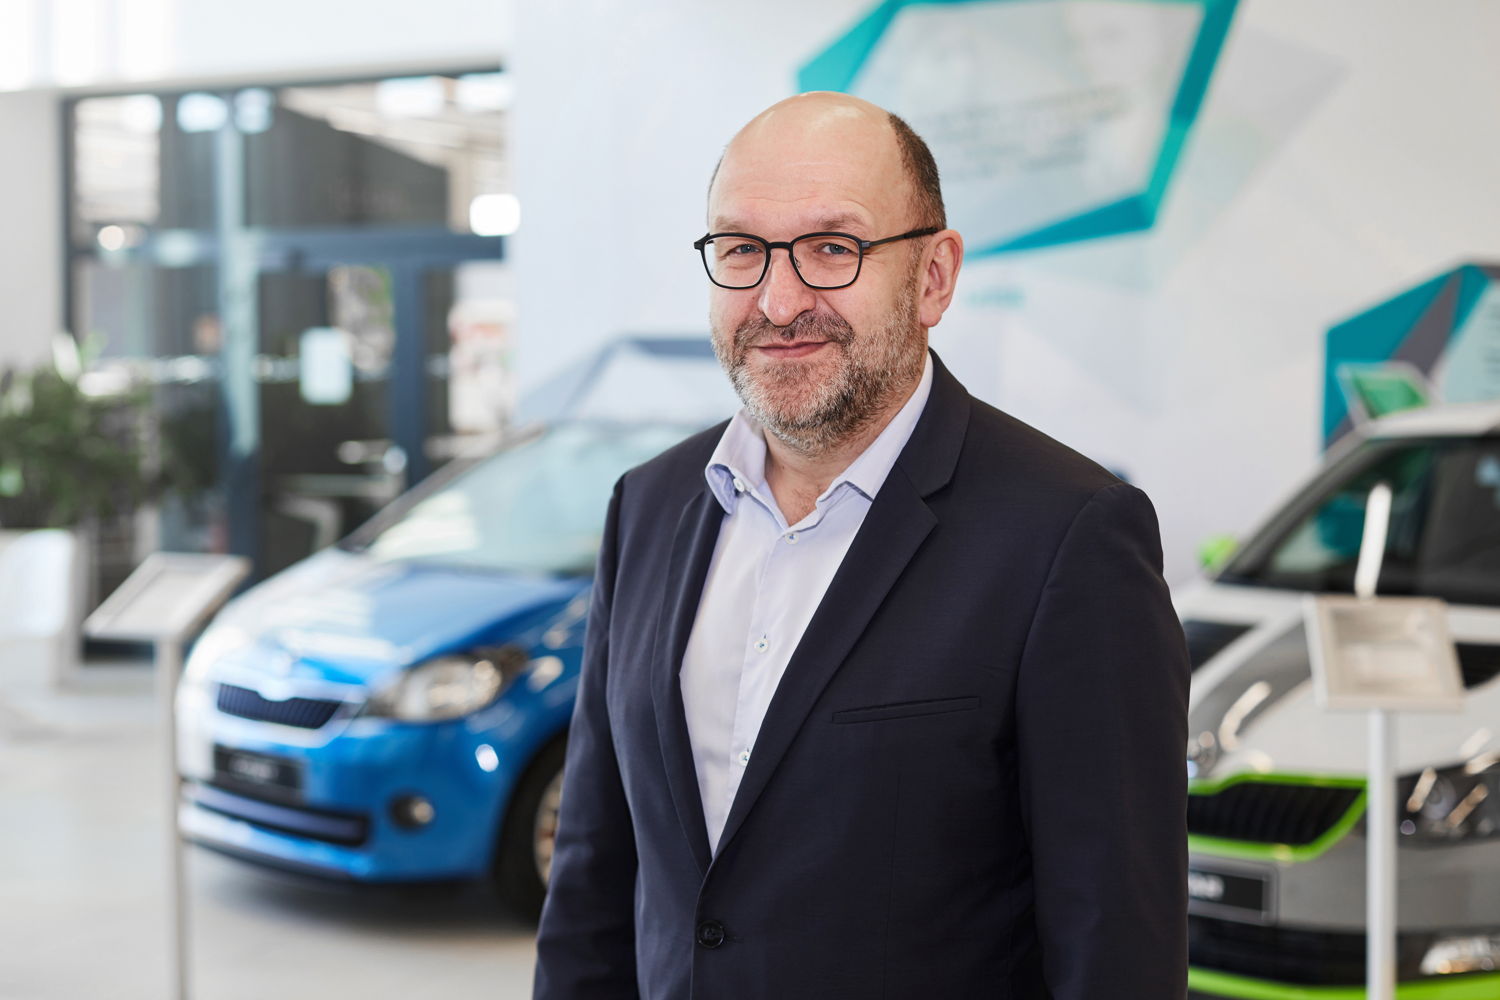 The ŠKODA Academy has a new director: since February
2020, Alois Kauer has been leading ŠKODA’s vocational
school and has also assumed the patronage for the
practical project ‘Apprentice Car’.